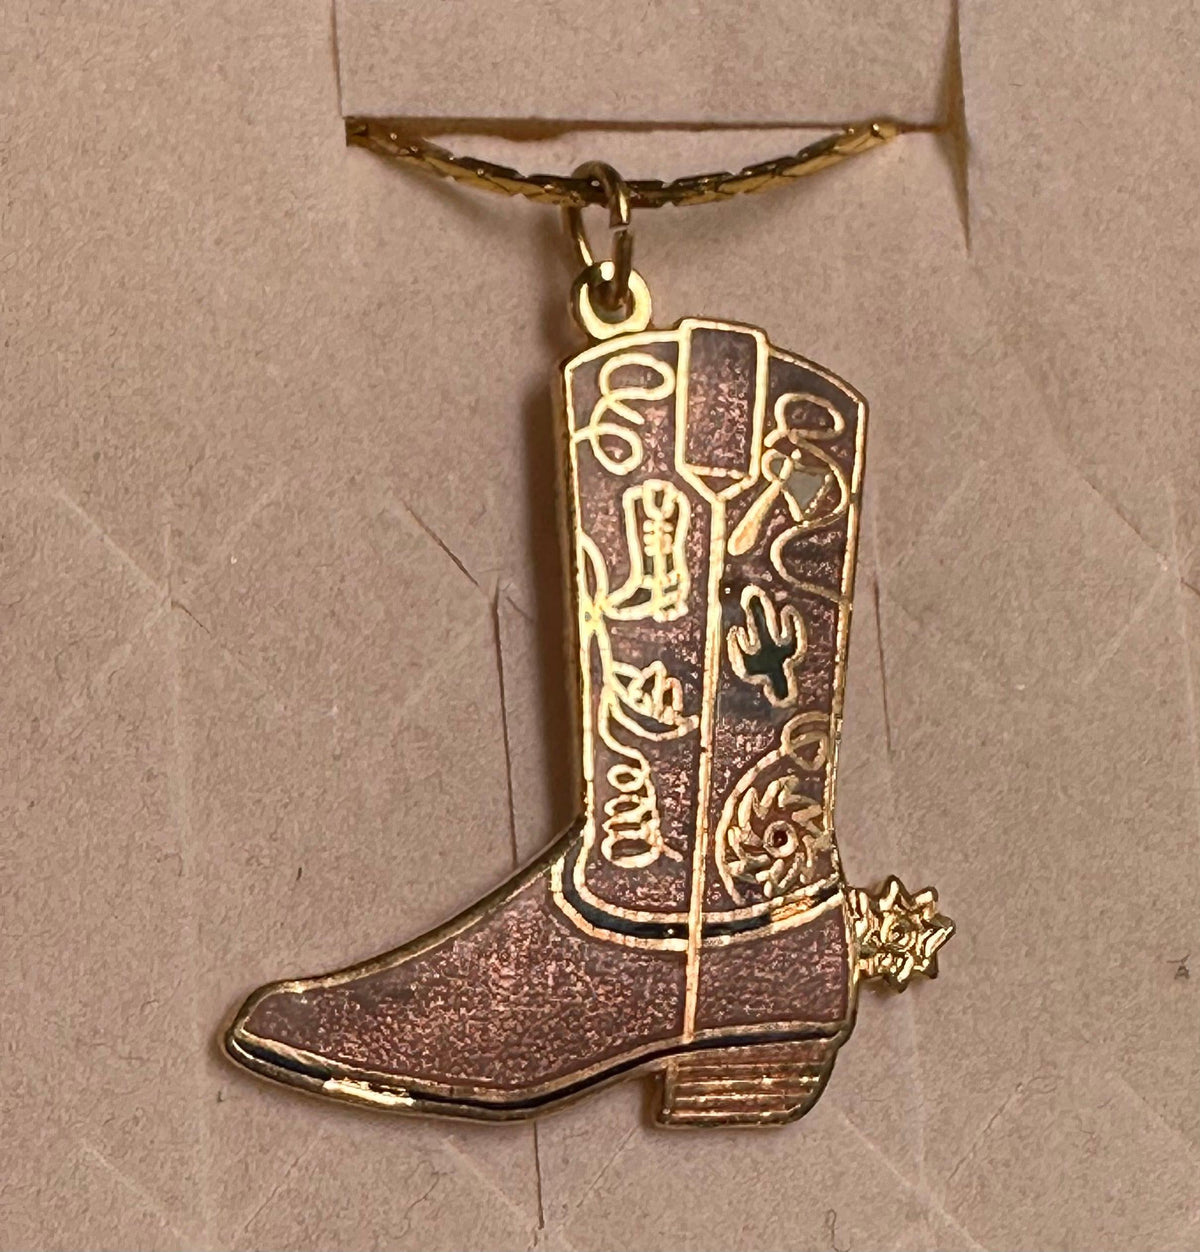 A gold Square Up Fashions Western Boot Necklace charm pendant in a jewelry box.